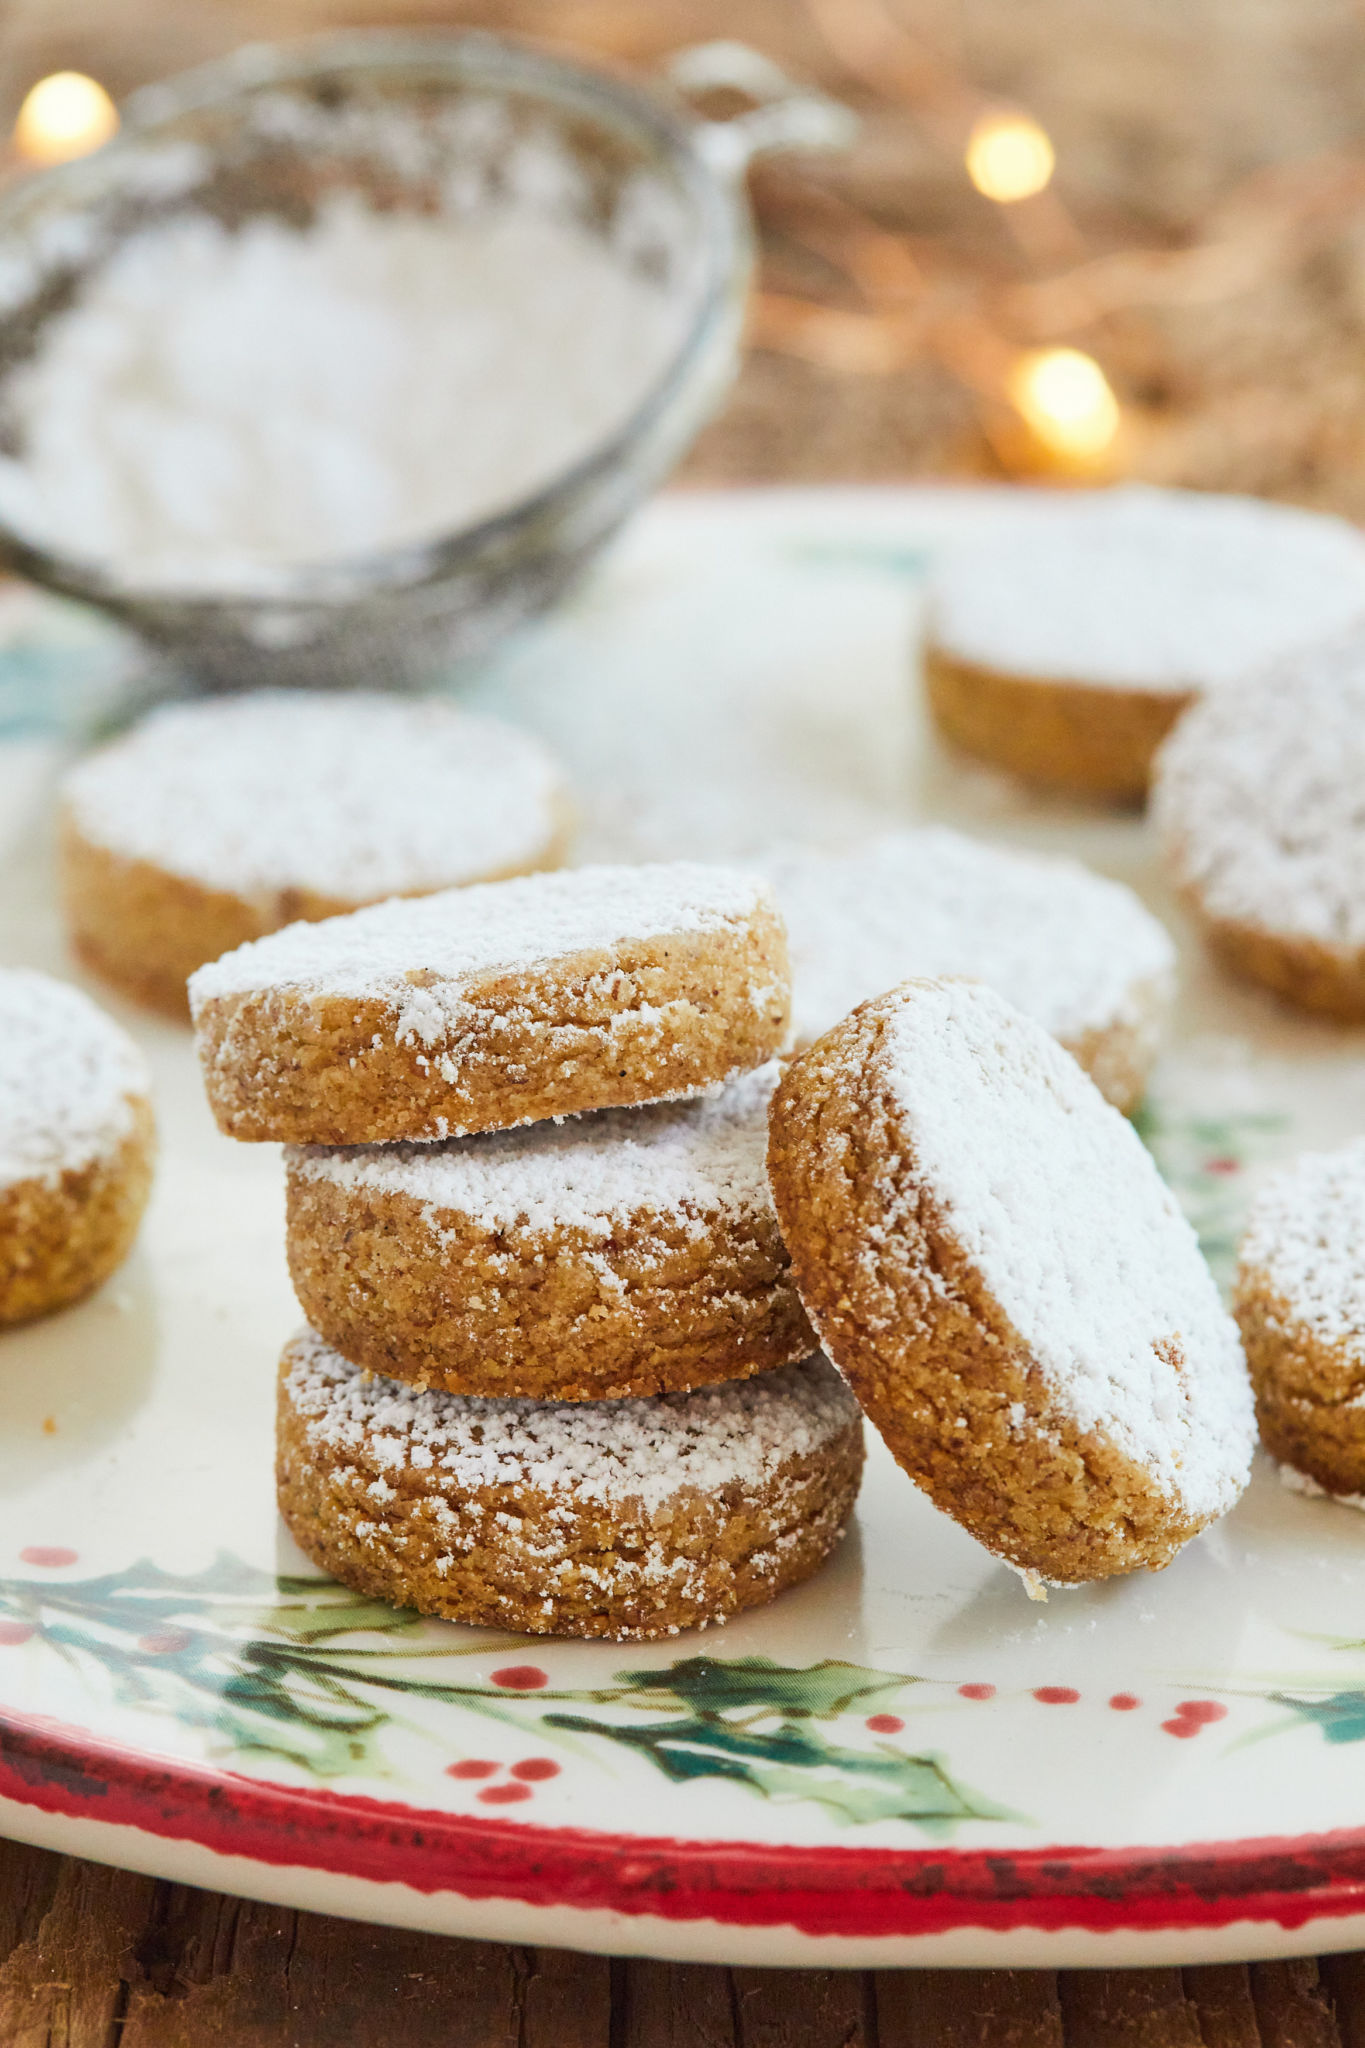 Polvorones, or Spanish almond cookies, are served on a plate decorated with holly berries. The cookies are slightly thick and covered in powdered sugar. 